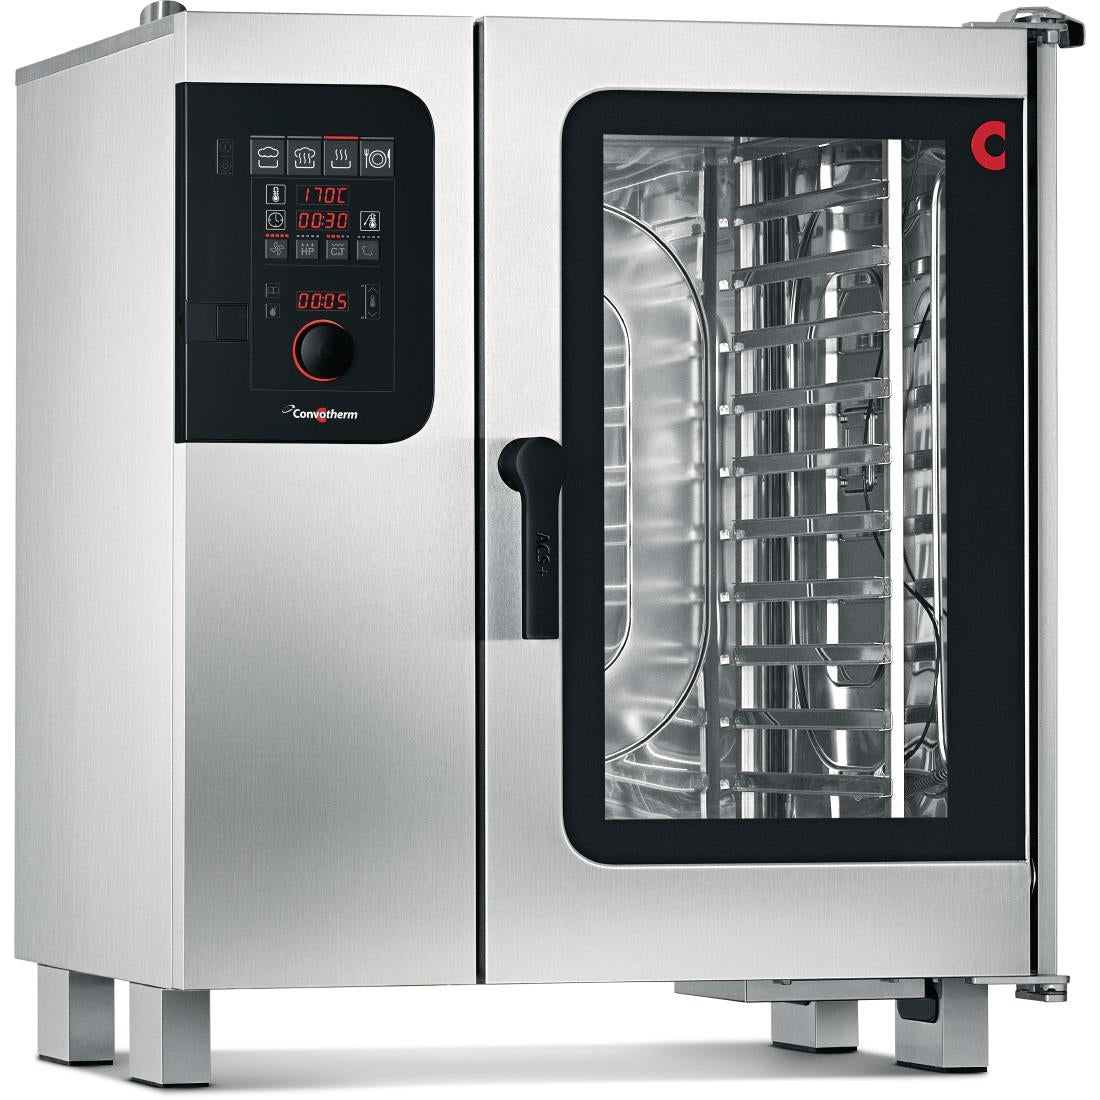 Convotherm 4 easyDial Combi Oven 10 x 1 x1 GN Grid with ConvoGrill